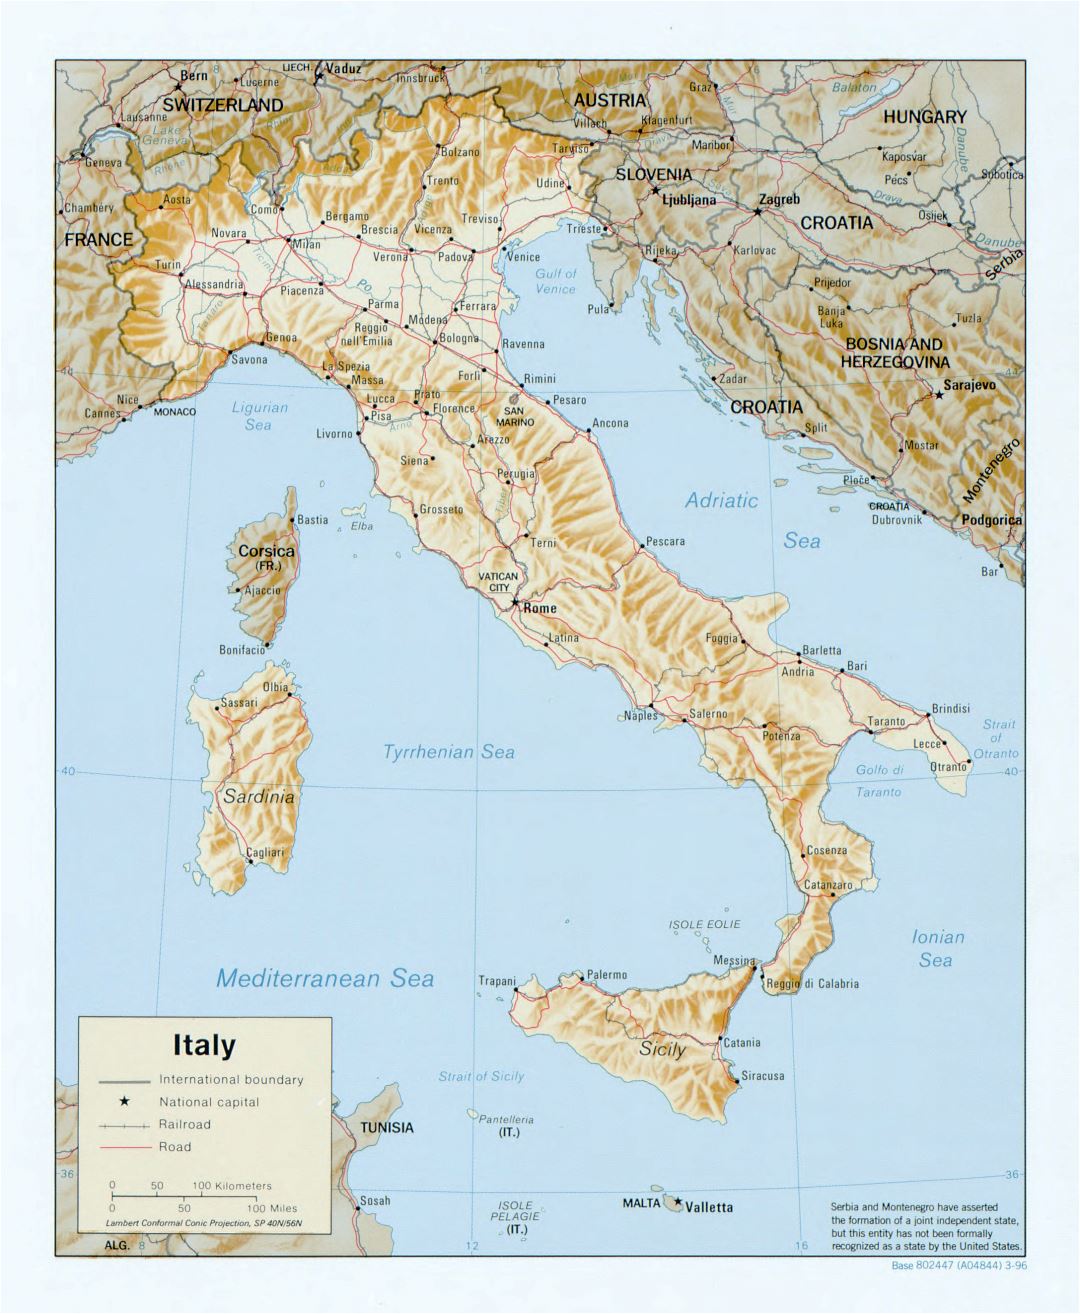 Large scale political map of Italy with relief, roads, railroads and major cities - 1996